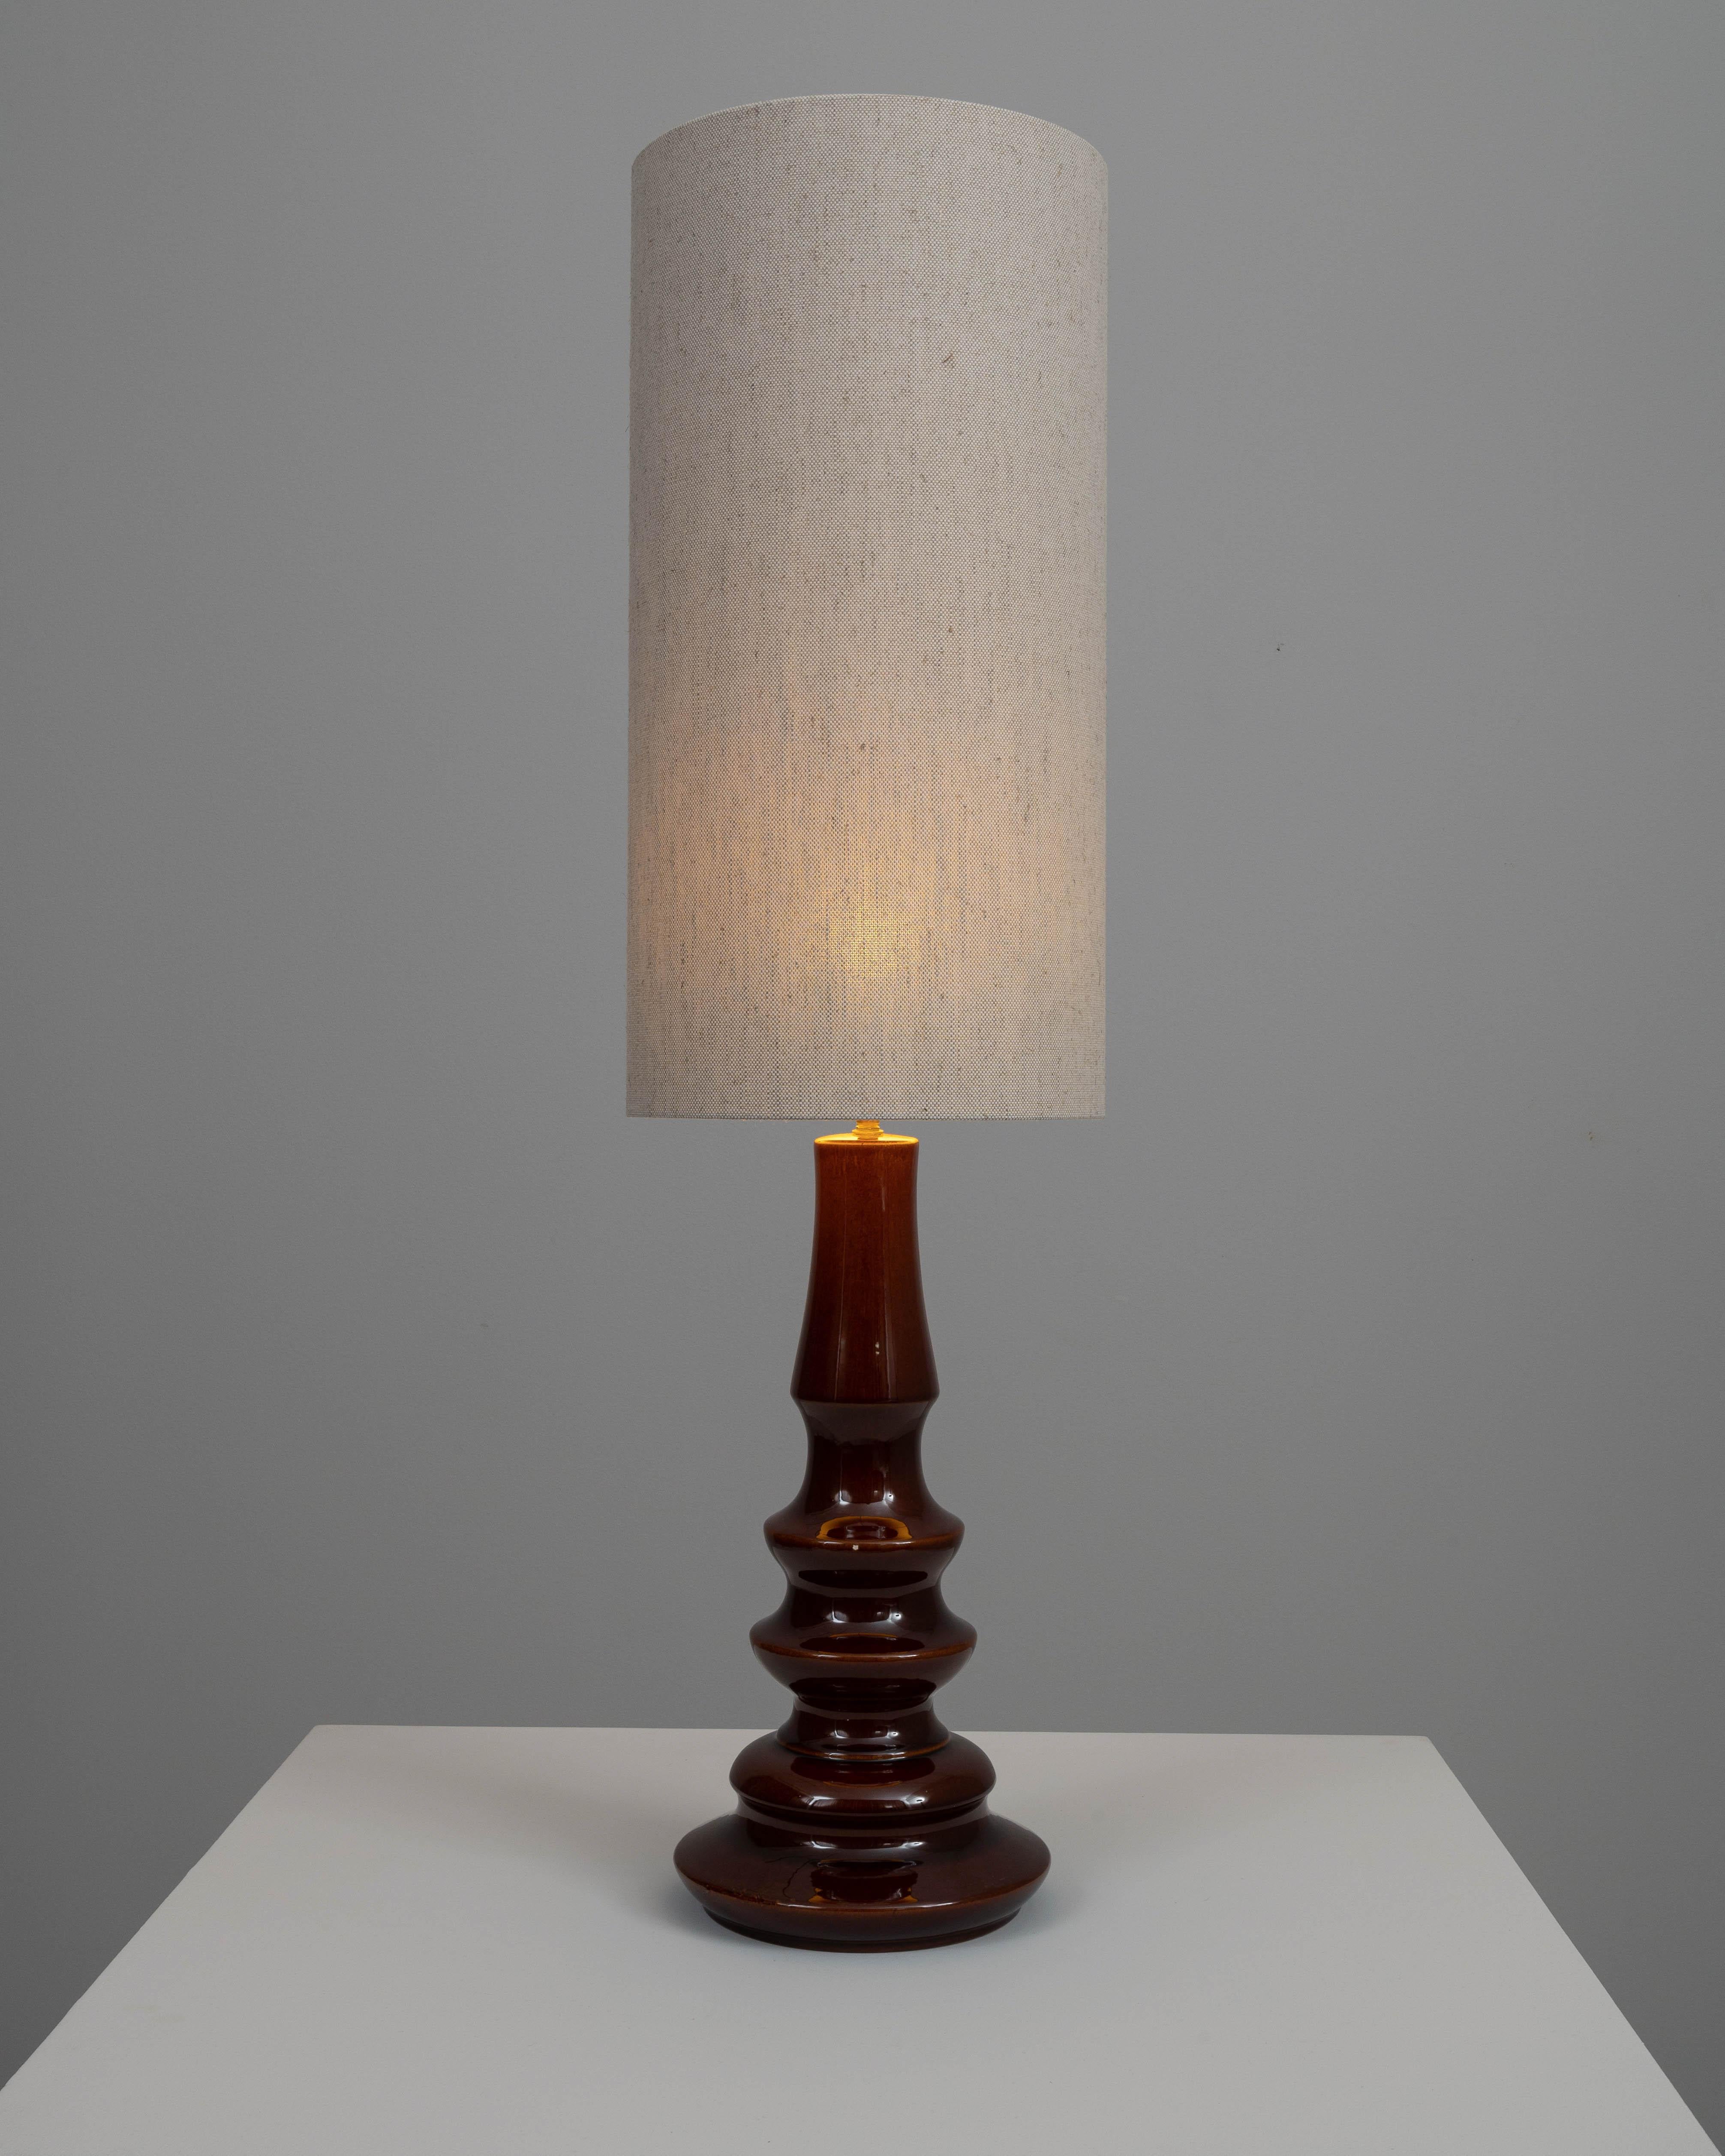 Early 20th Century British Ceramic Table Lamp In Good Condition For Sale In High Point, NC